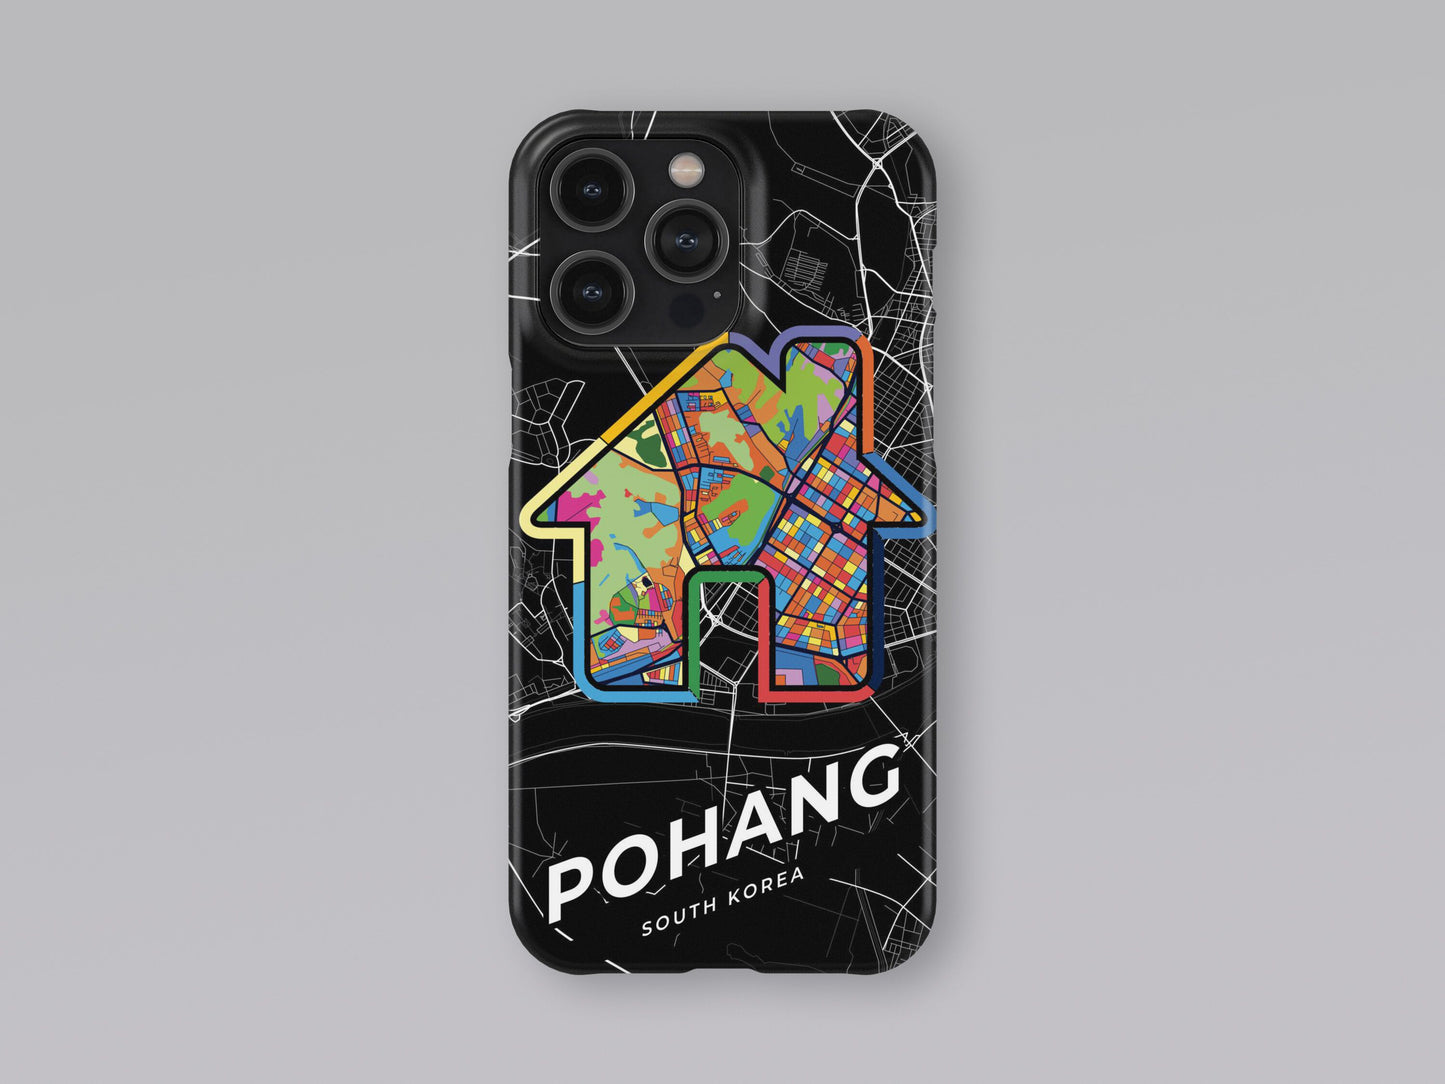 Pohang South Korea slim phone case with colorful icon. Birthday, wedding or housewarming gift. Couple match cases. 3